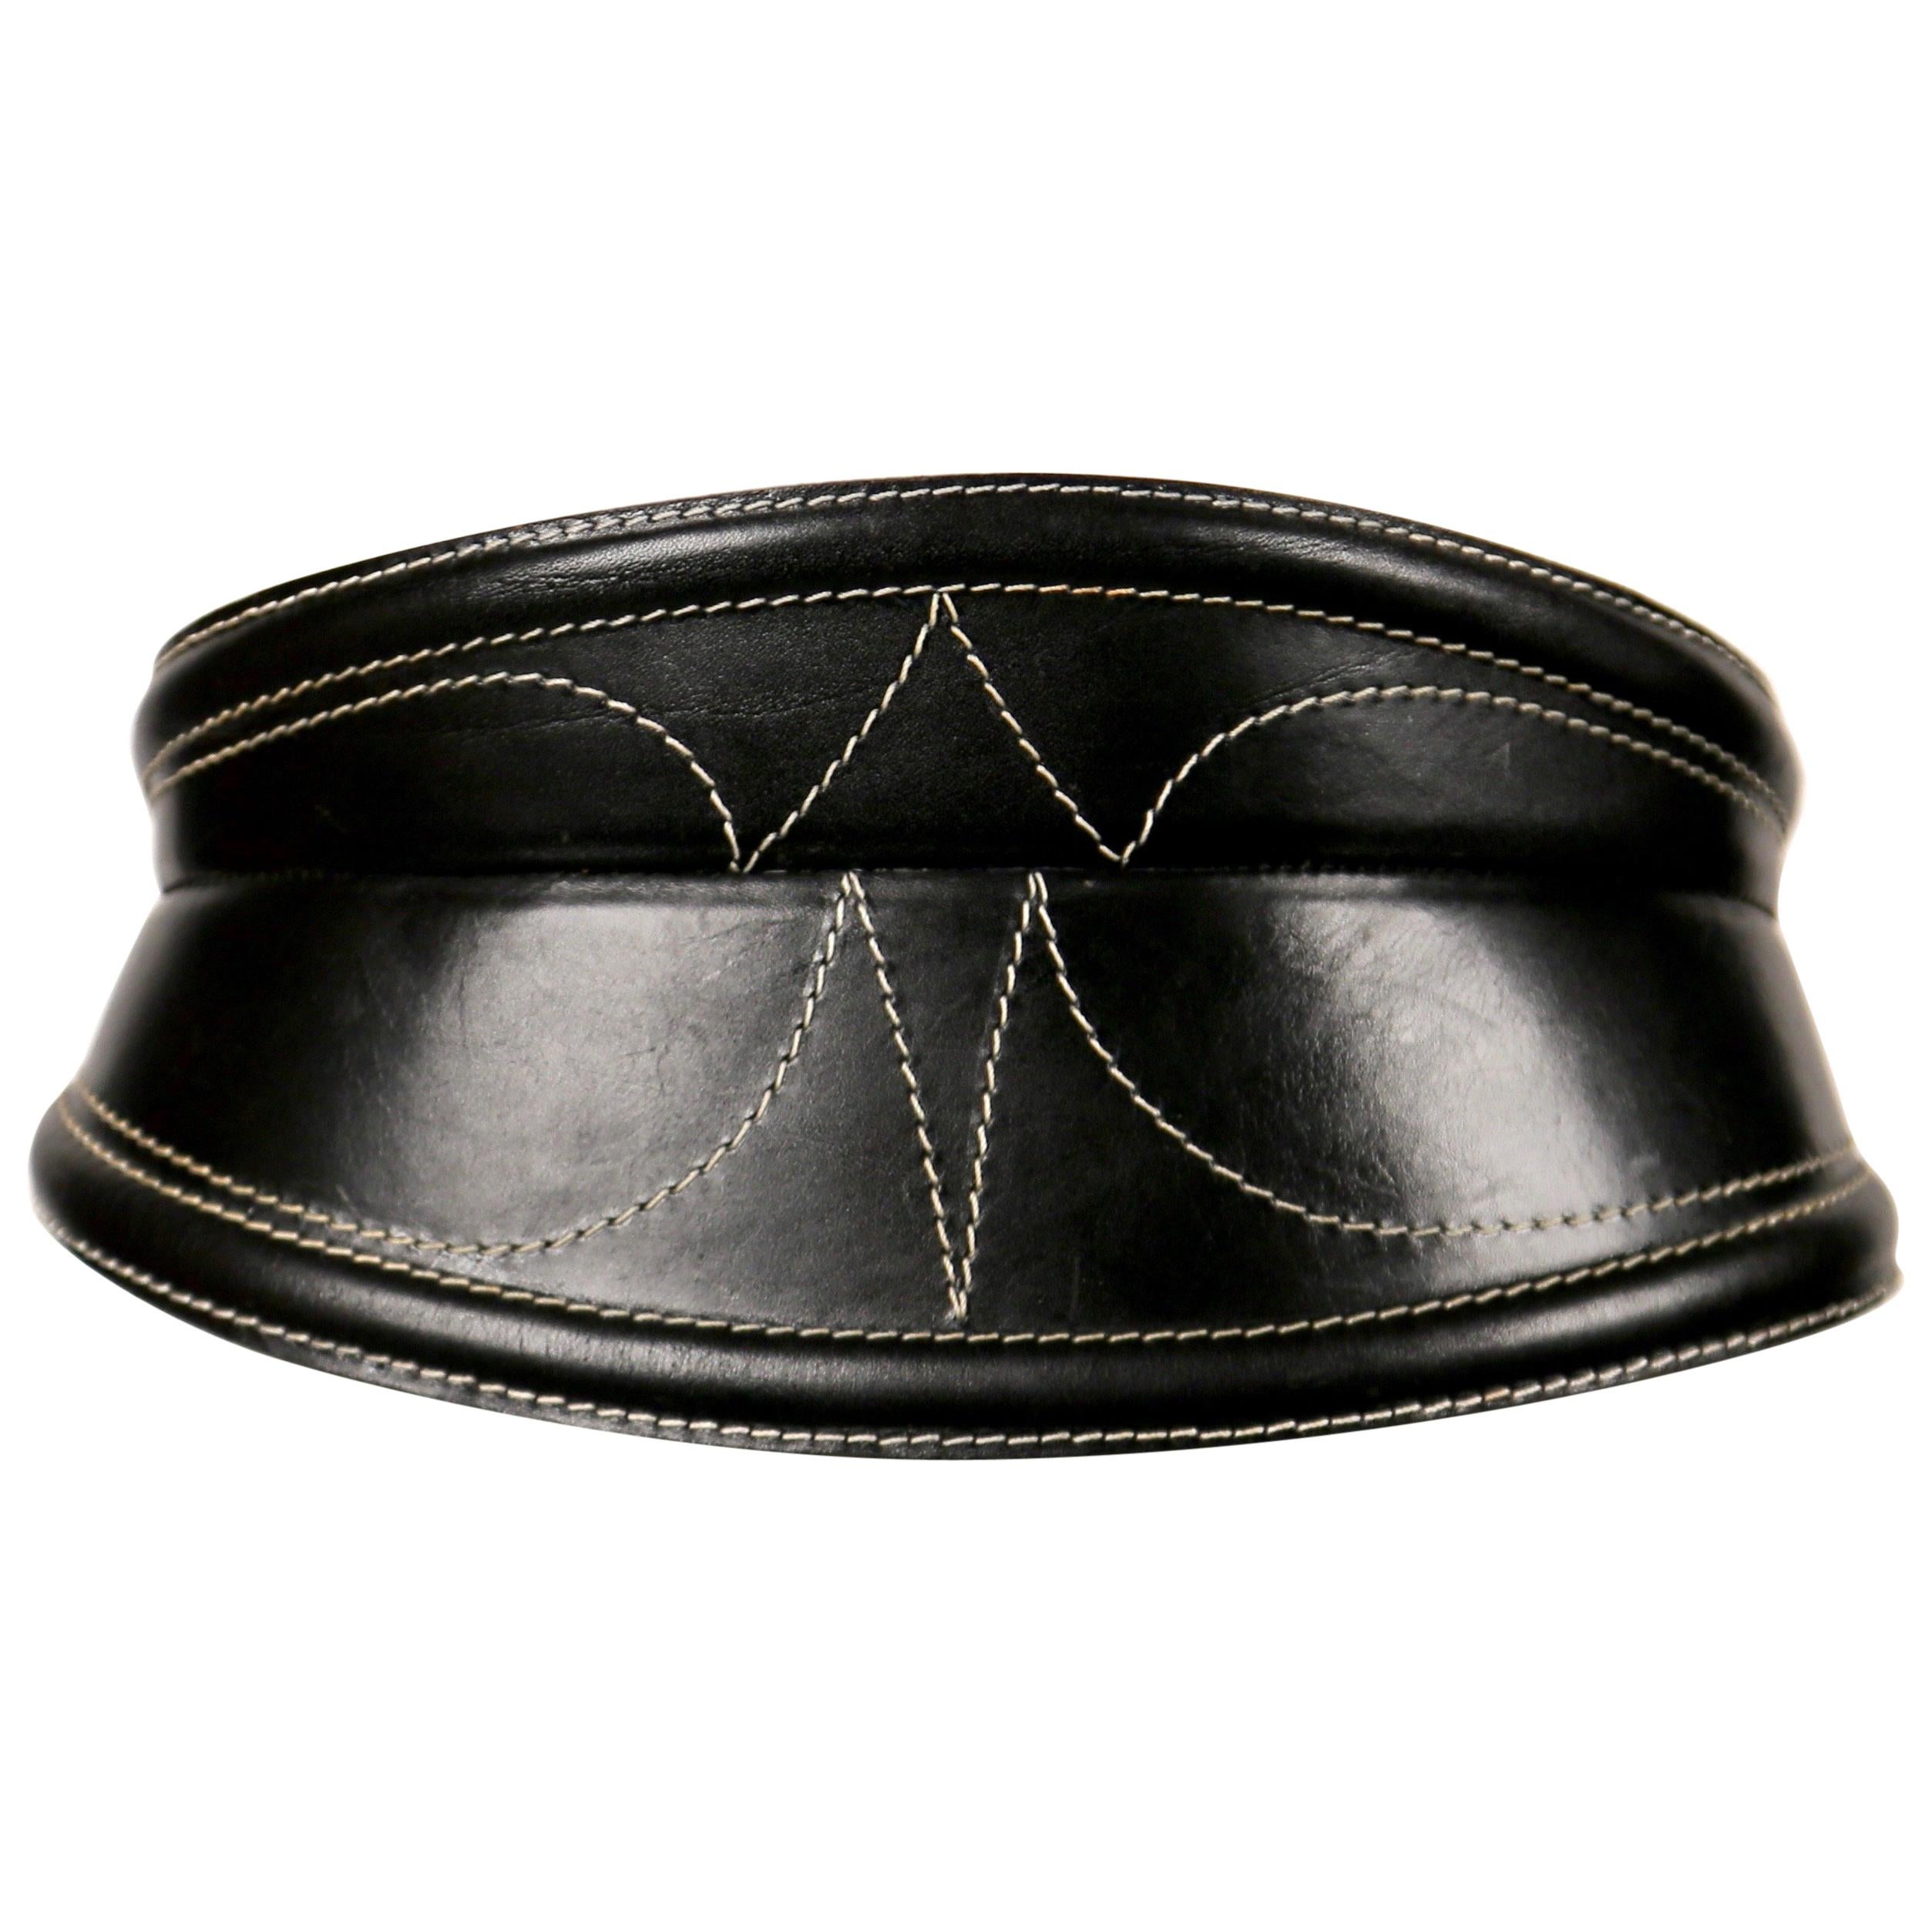 1980's GIANFRANCO FERRE wide black leather belt with top-stitching